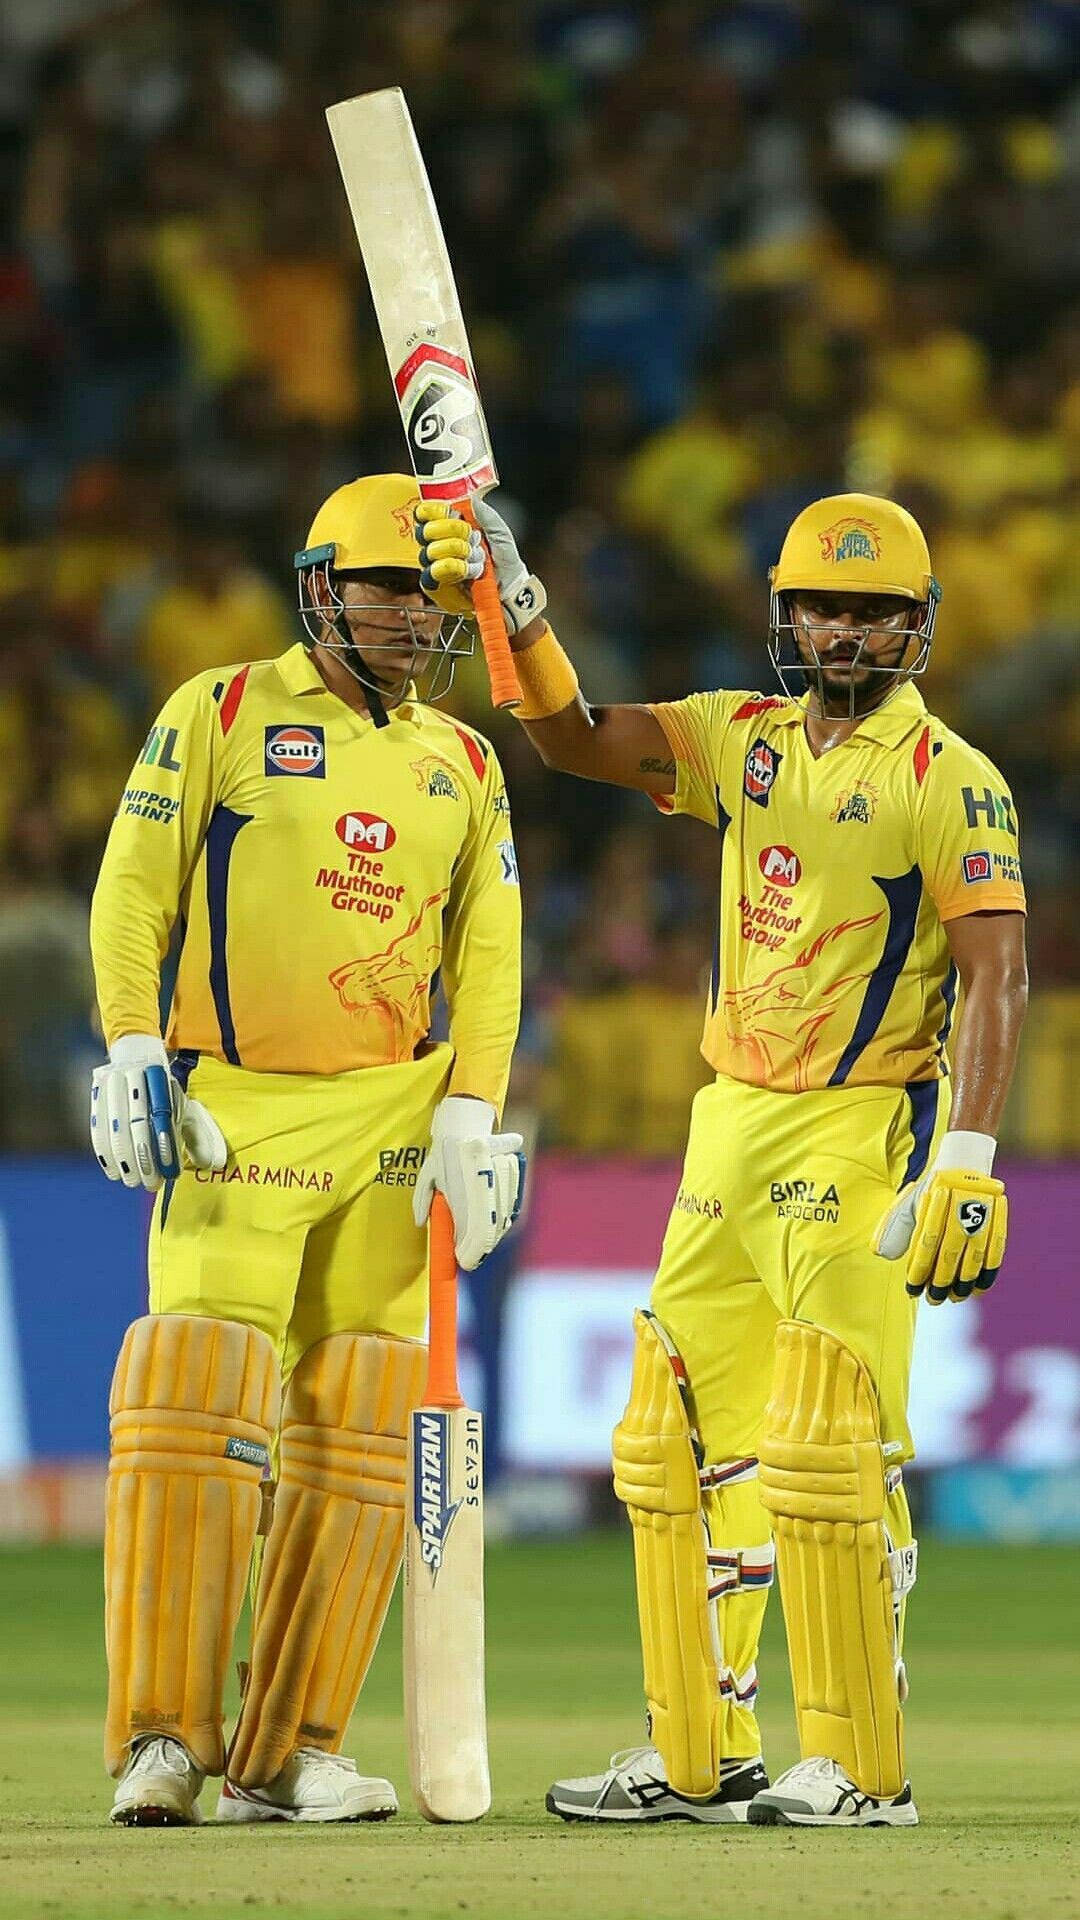 CSK ND Android Wallpapers - Wallpaper Cave - 1080 x 1920 jpeg 267kB